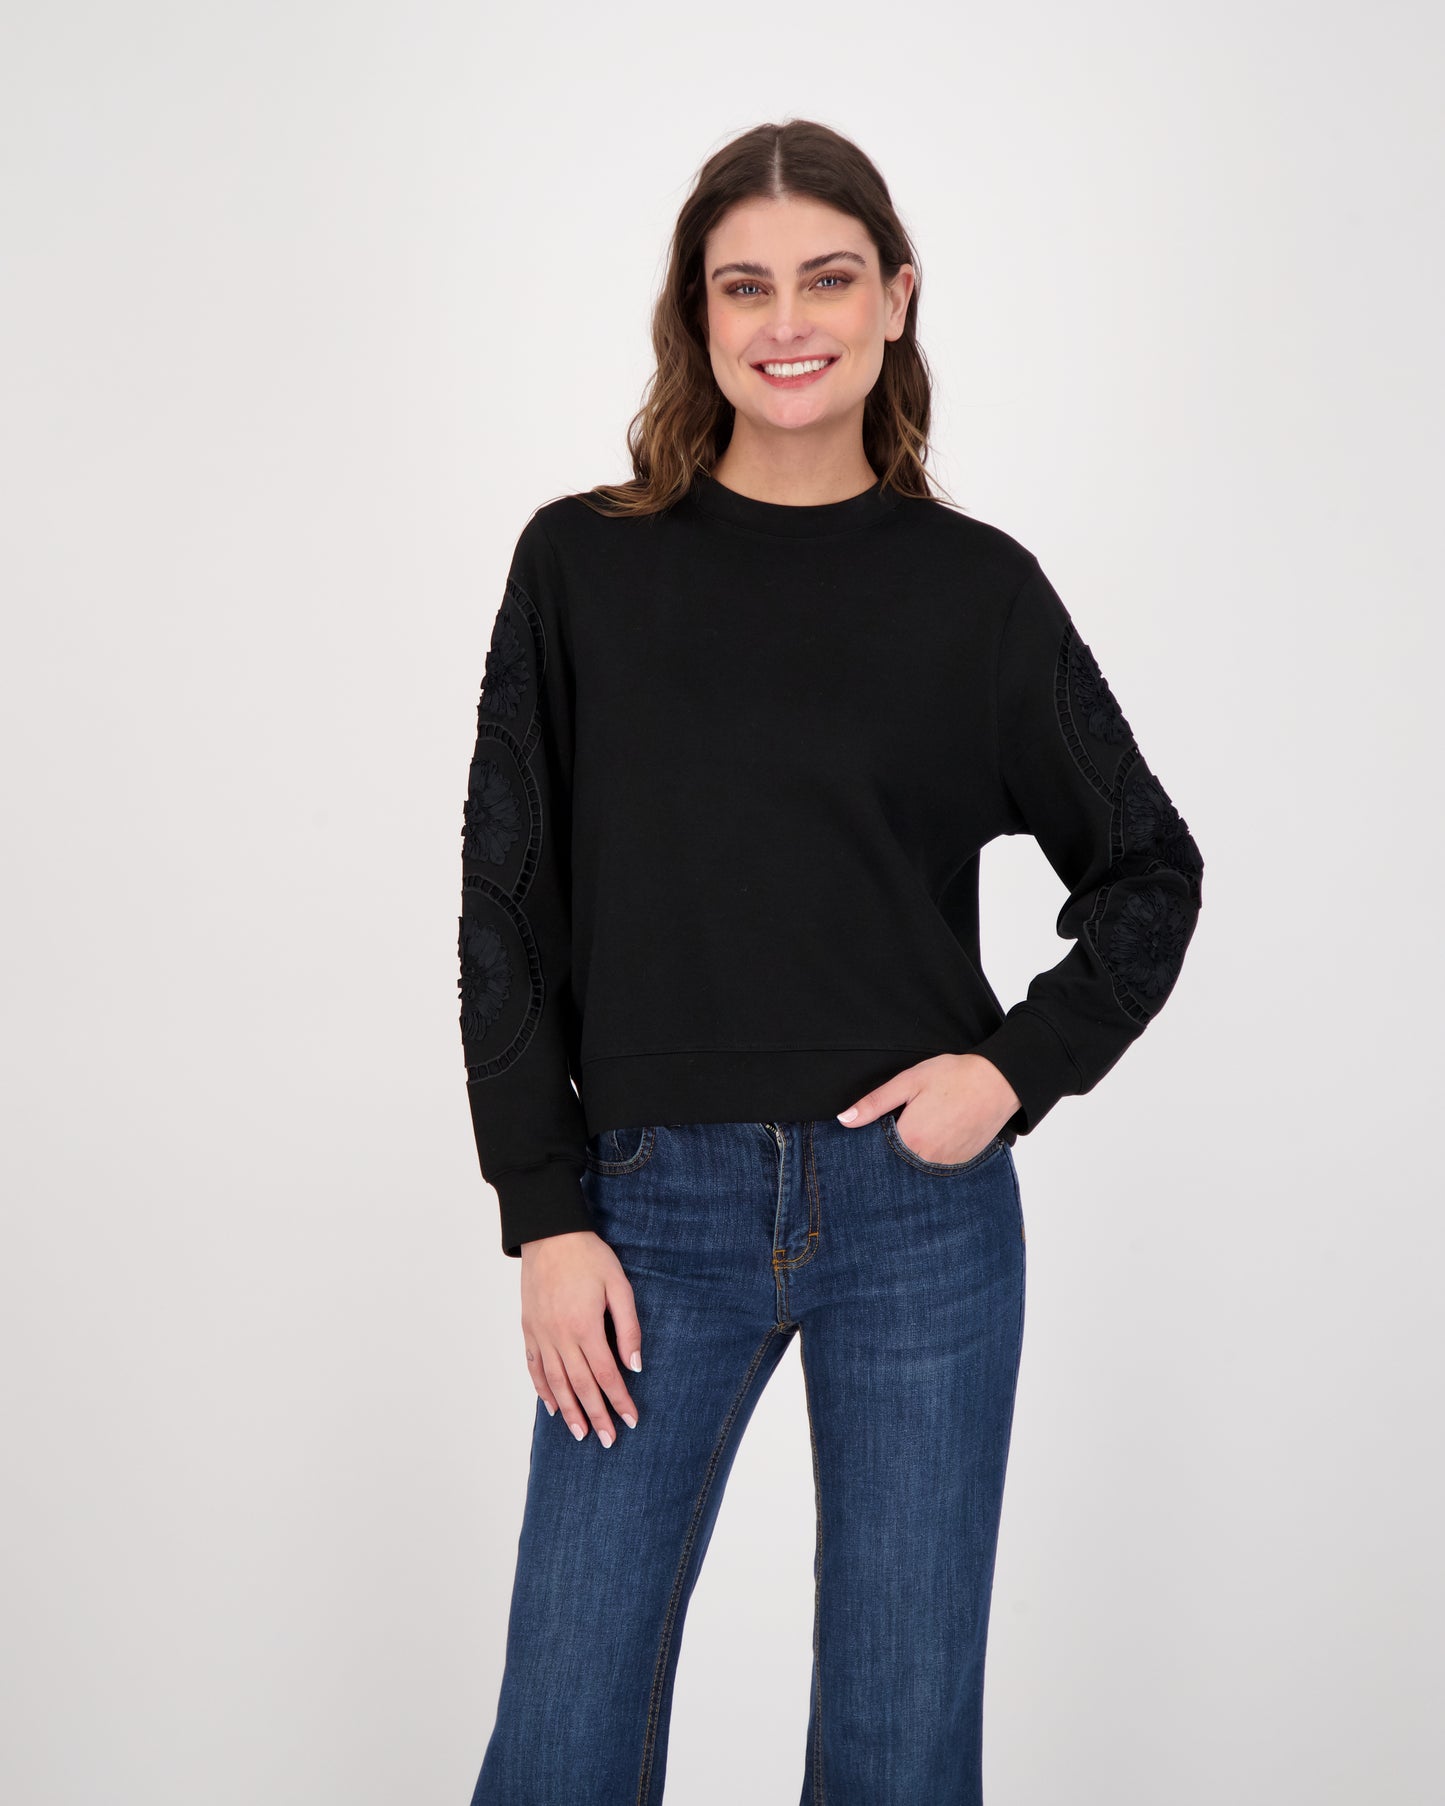 Sweatshirt With Ladder Lace Trimmer Sleeves